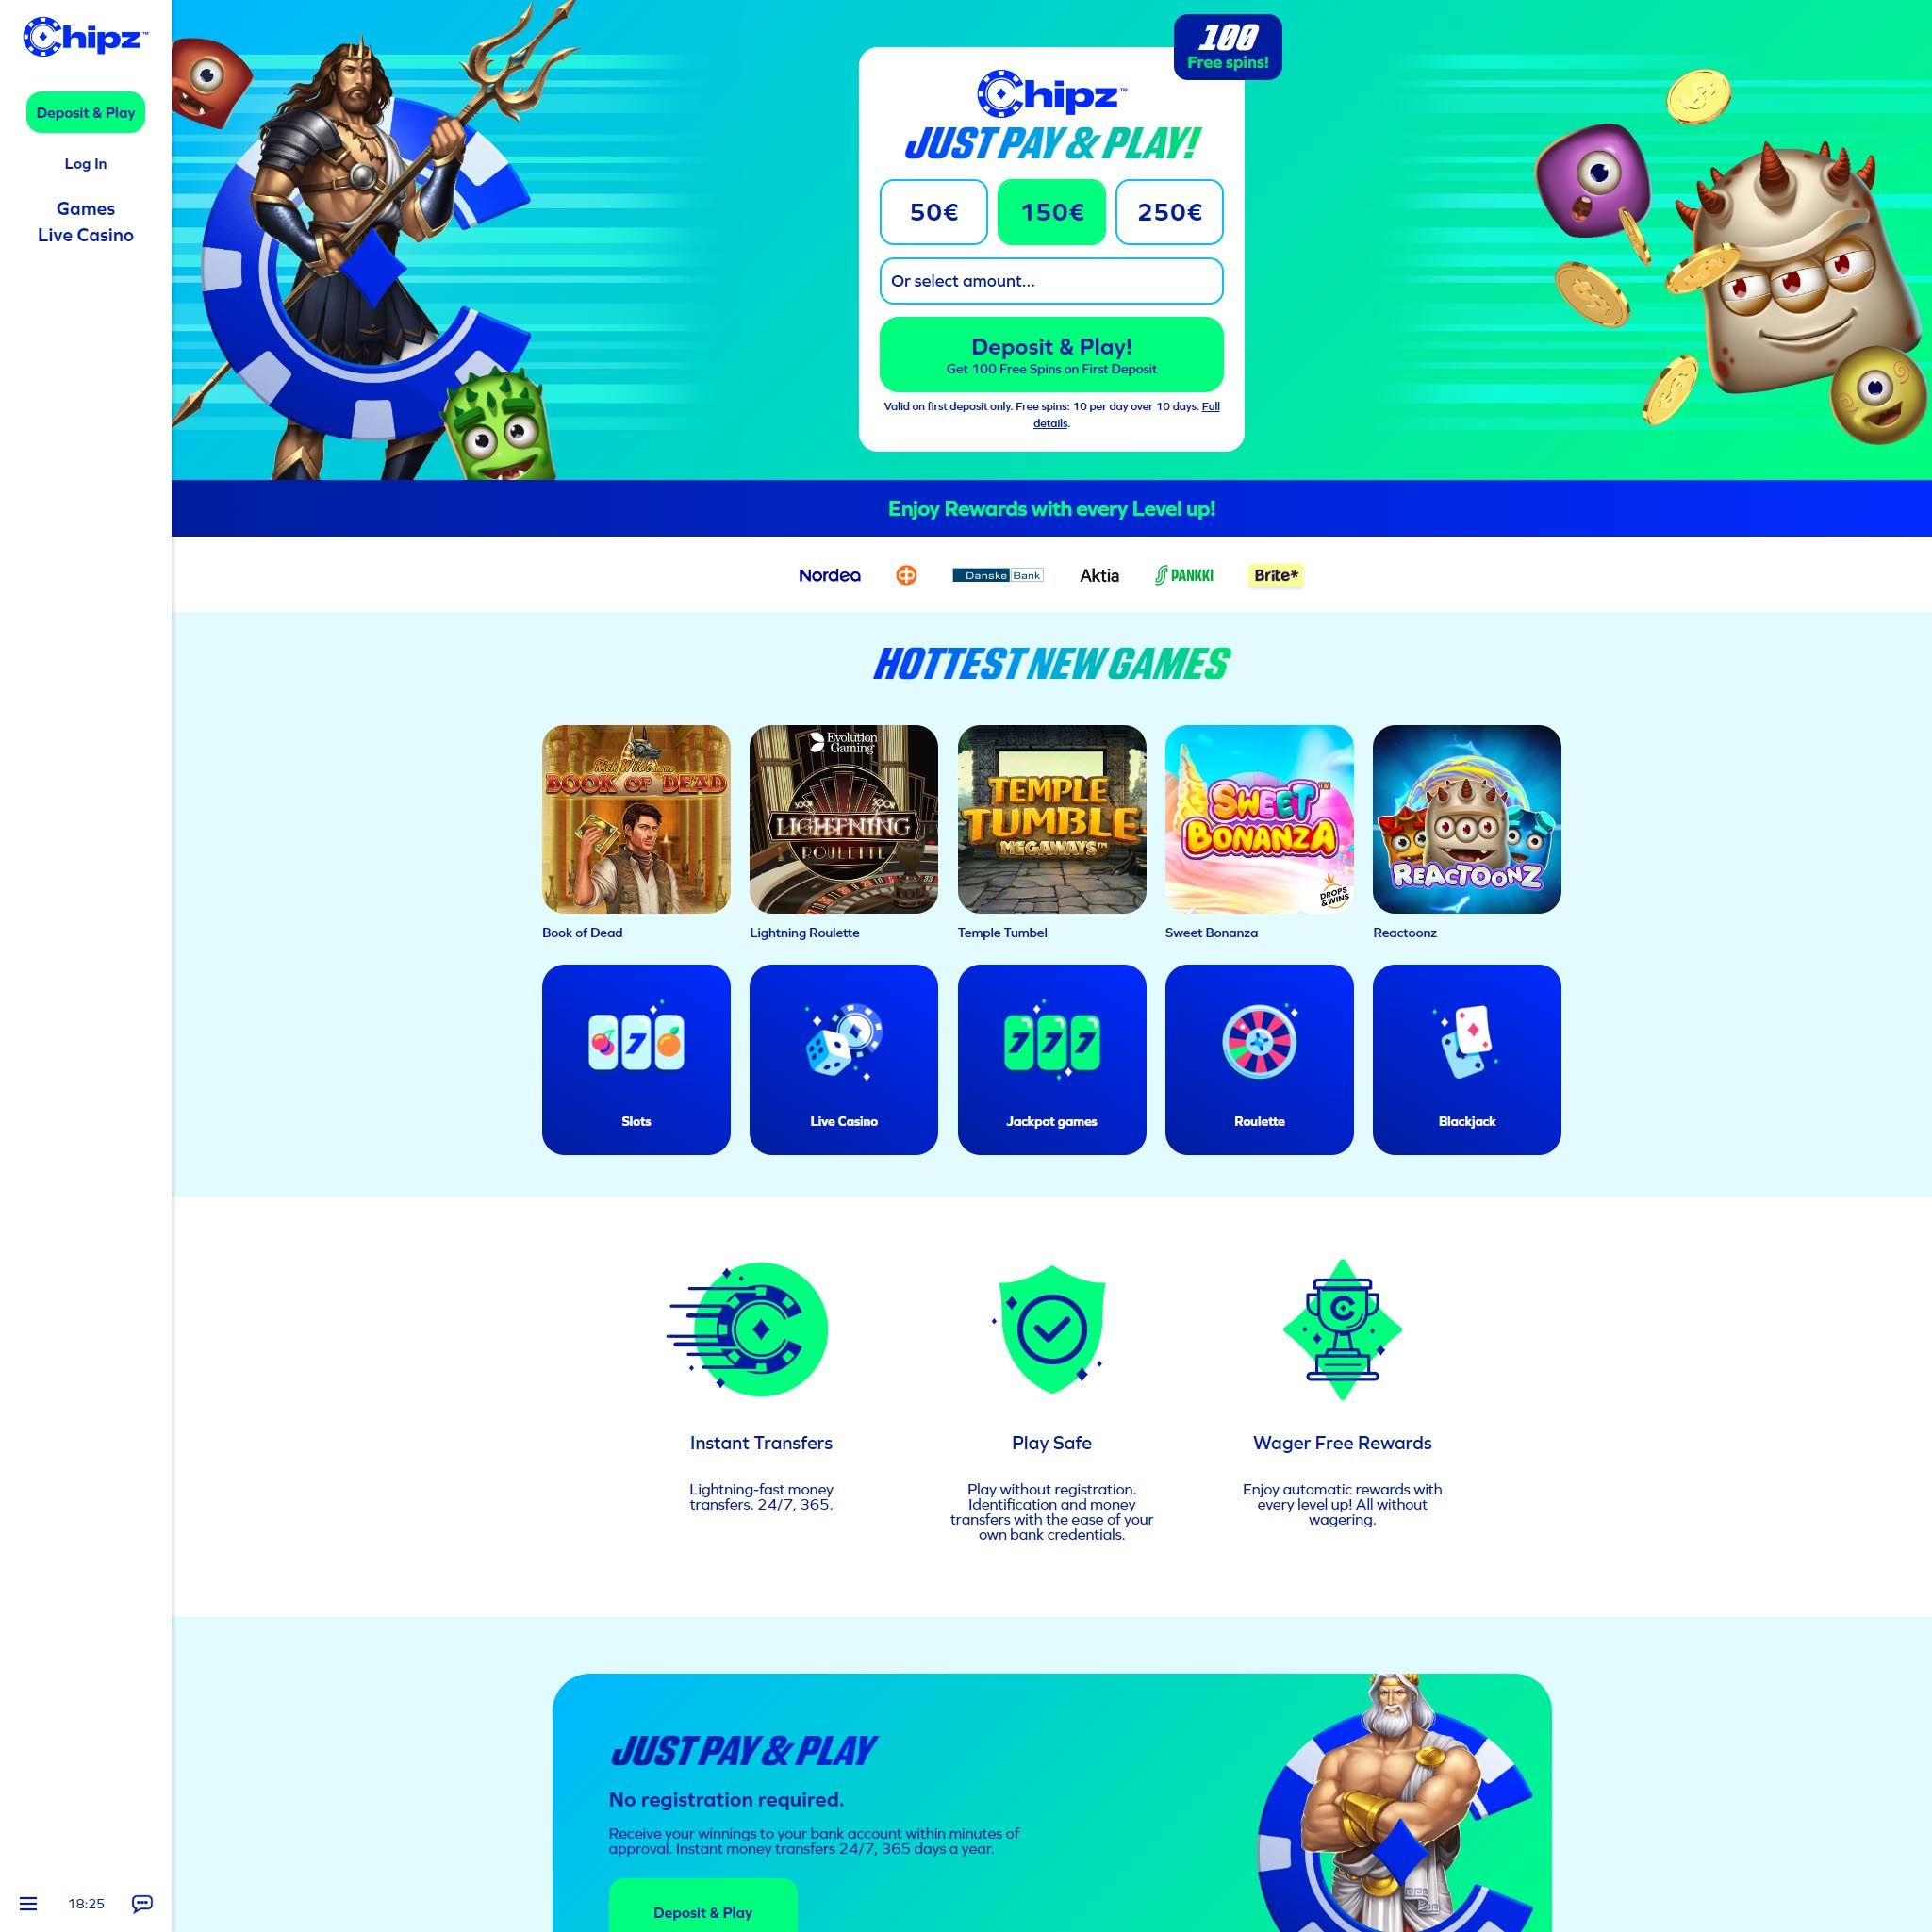 Chipz Casino review by Mr. Gamble